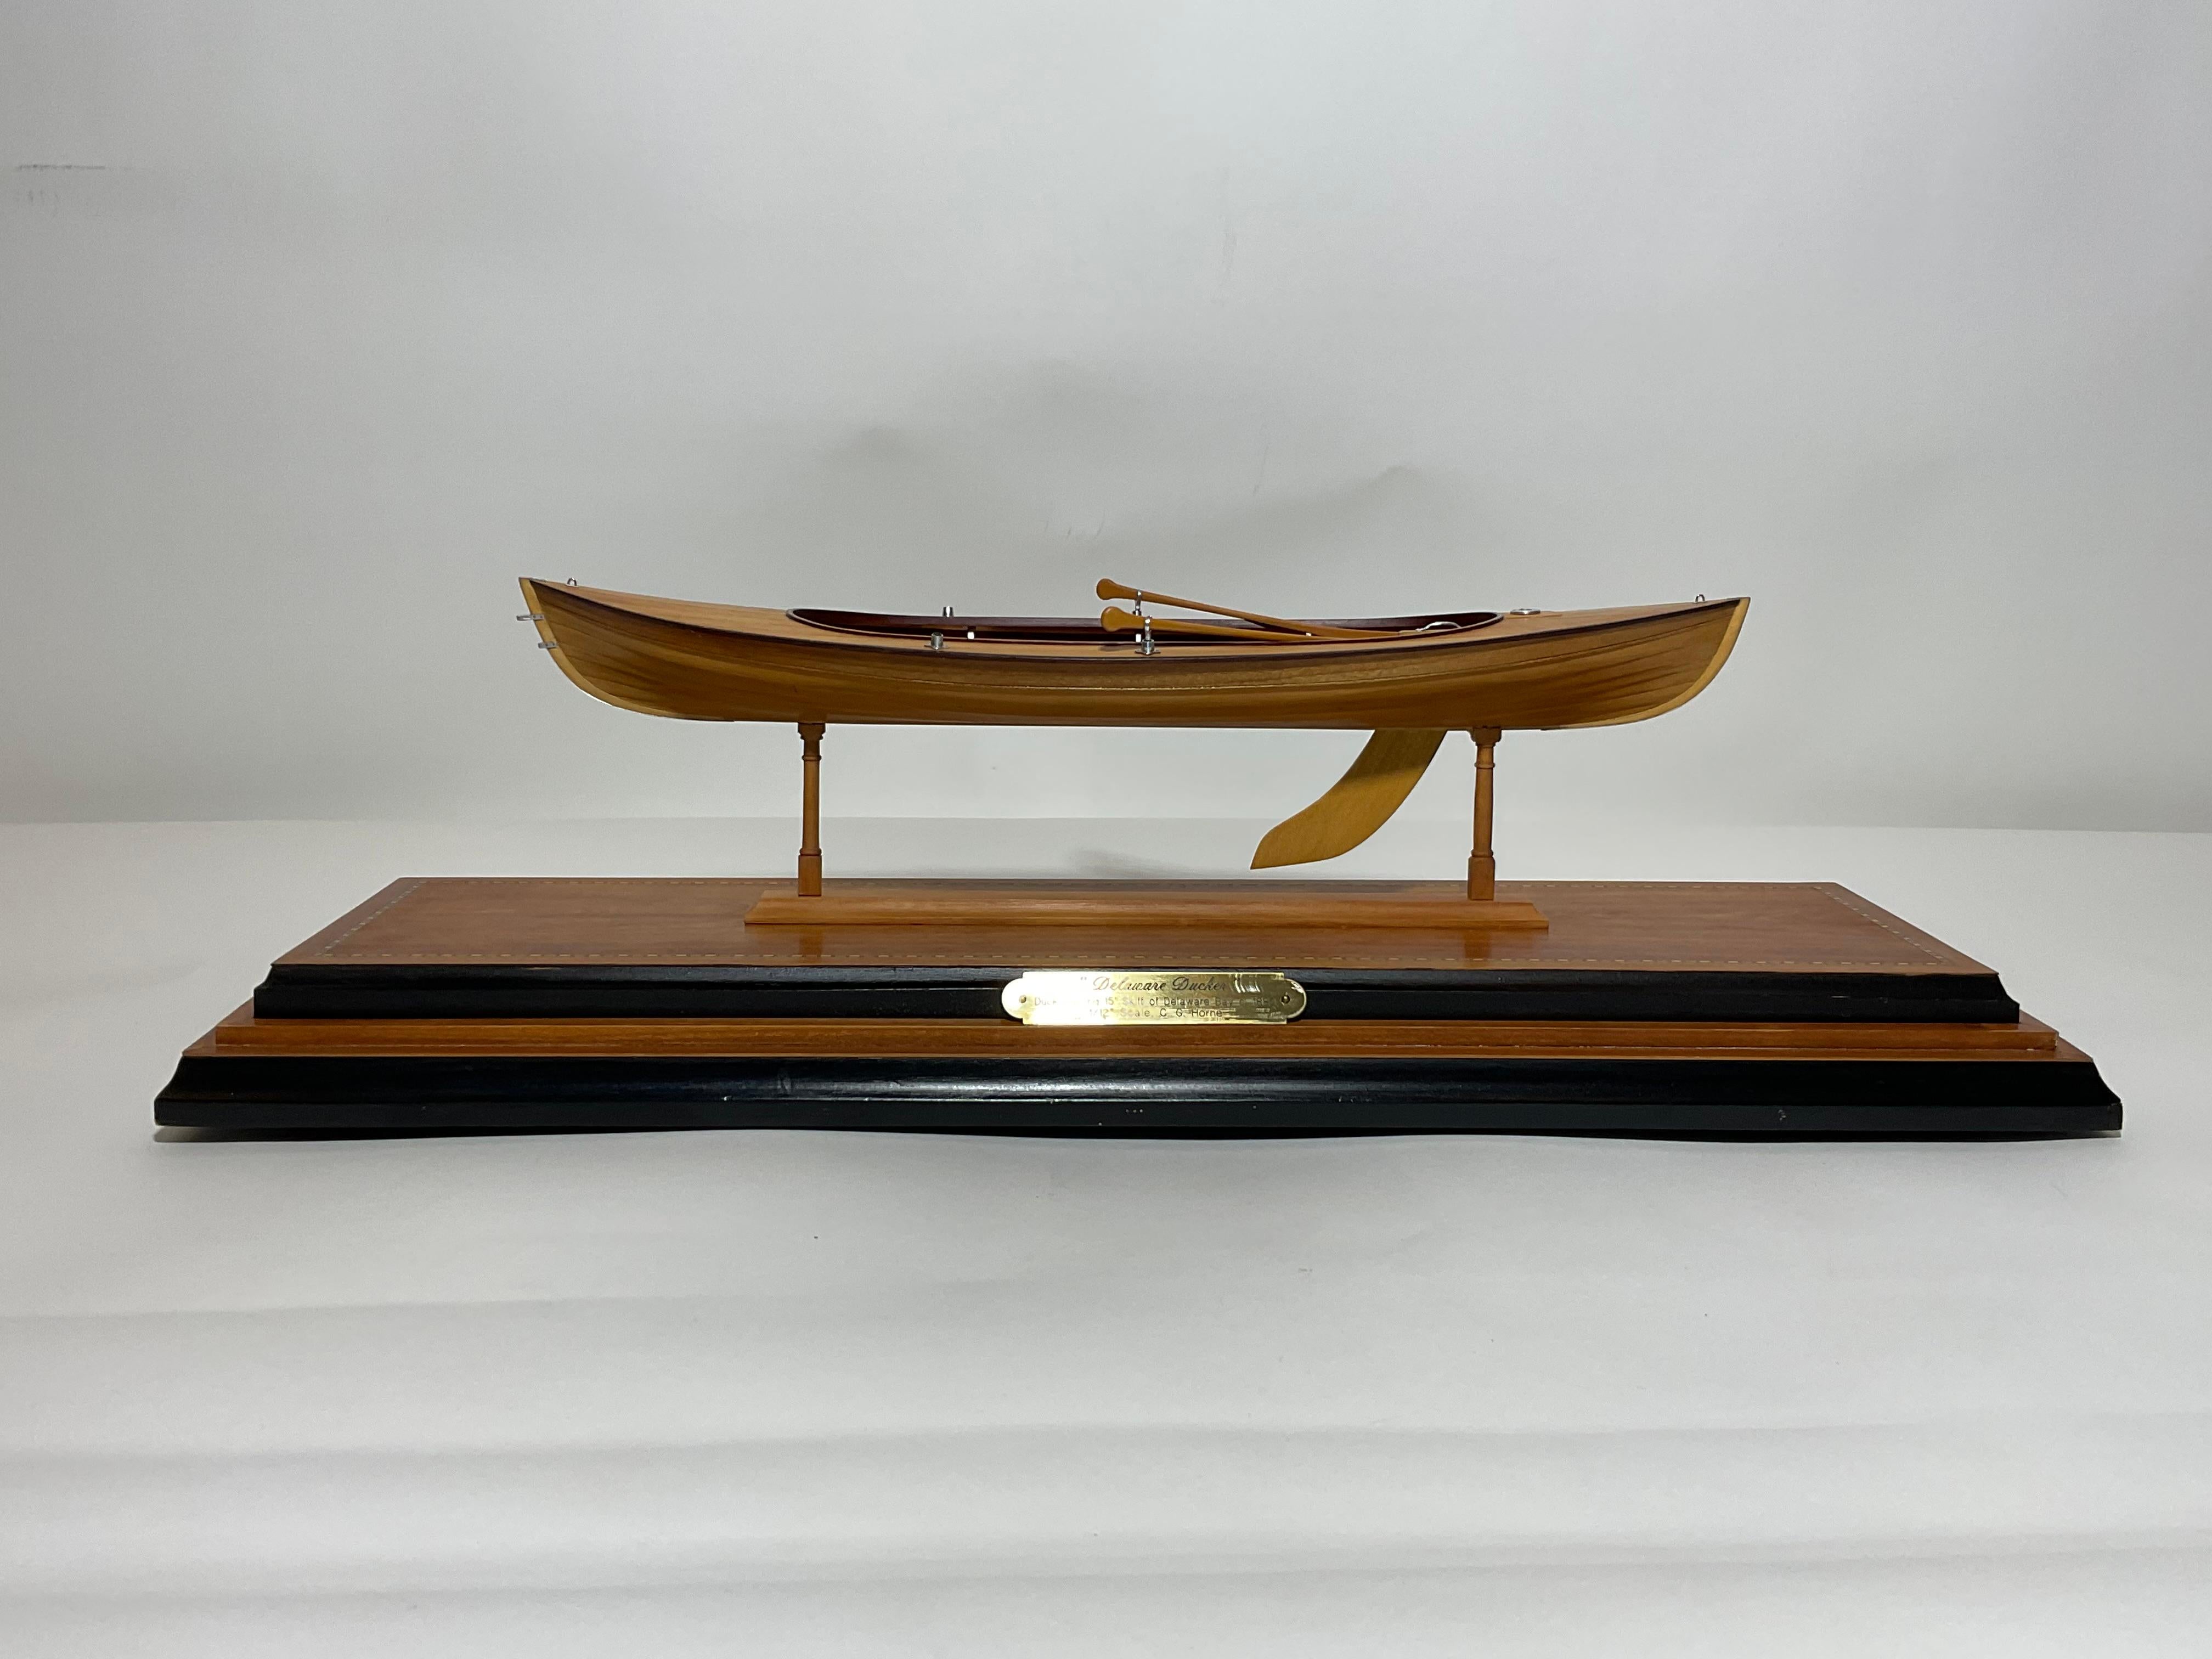 Contemporary Delaware Ducker Planked Model in Case For Sale